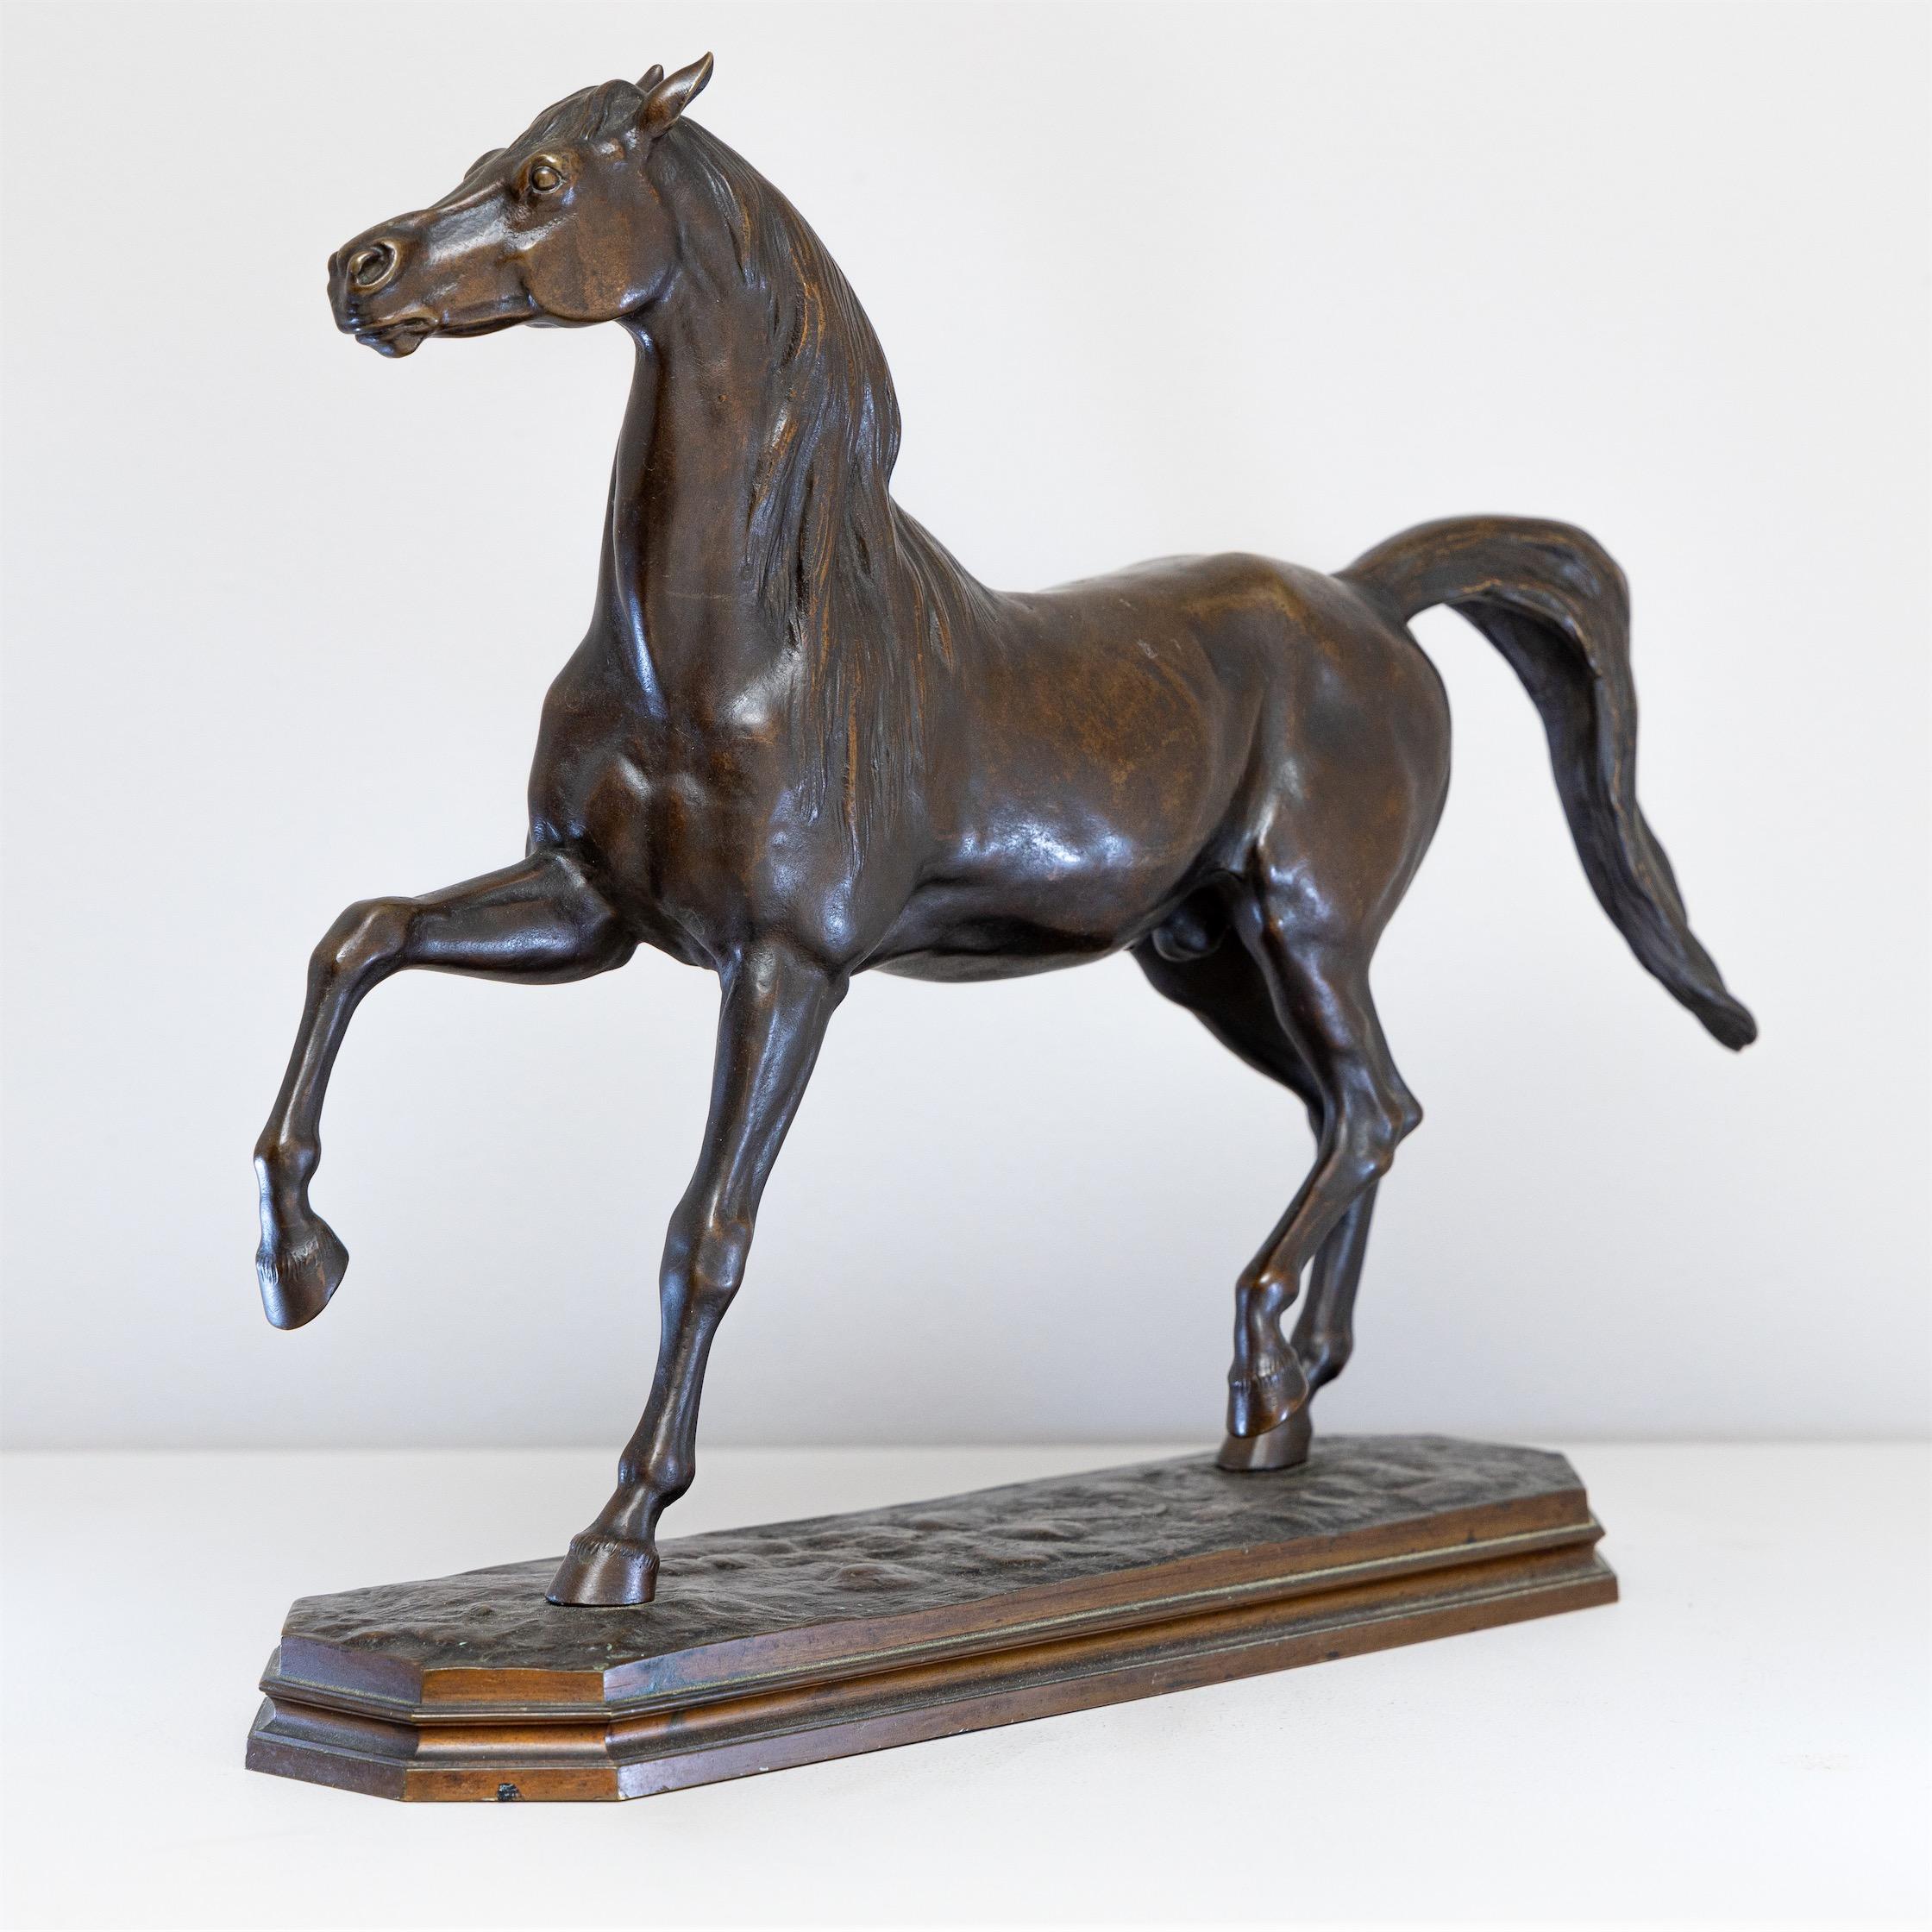 Naturalistic bronze sculpture of a horse galloping, with brown patina on an octagonal base.